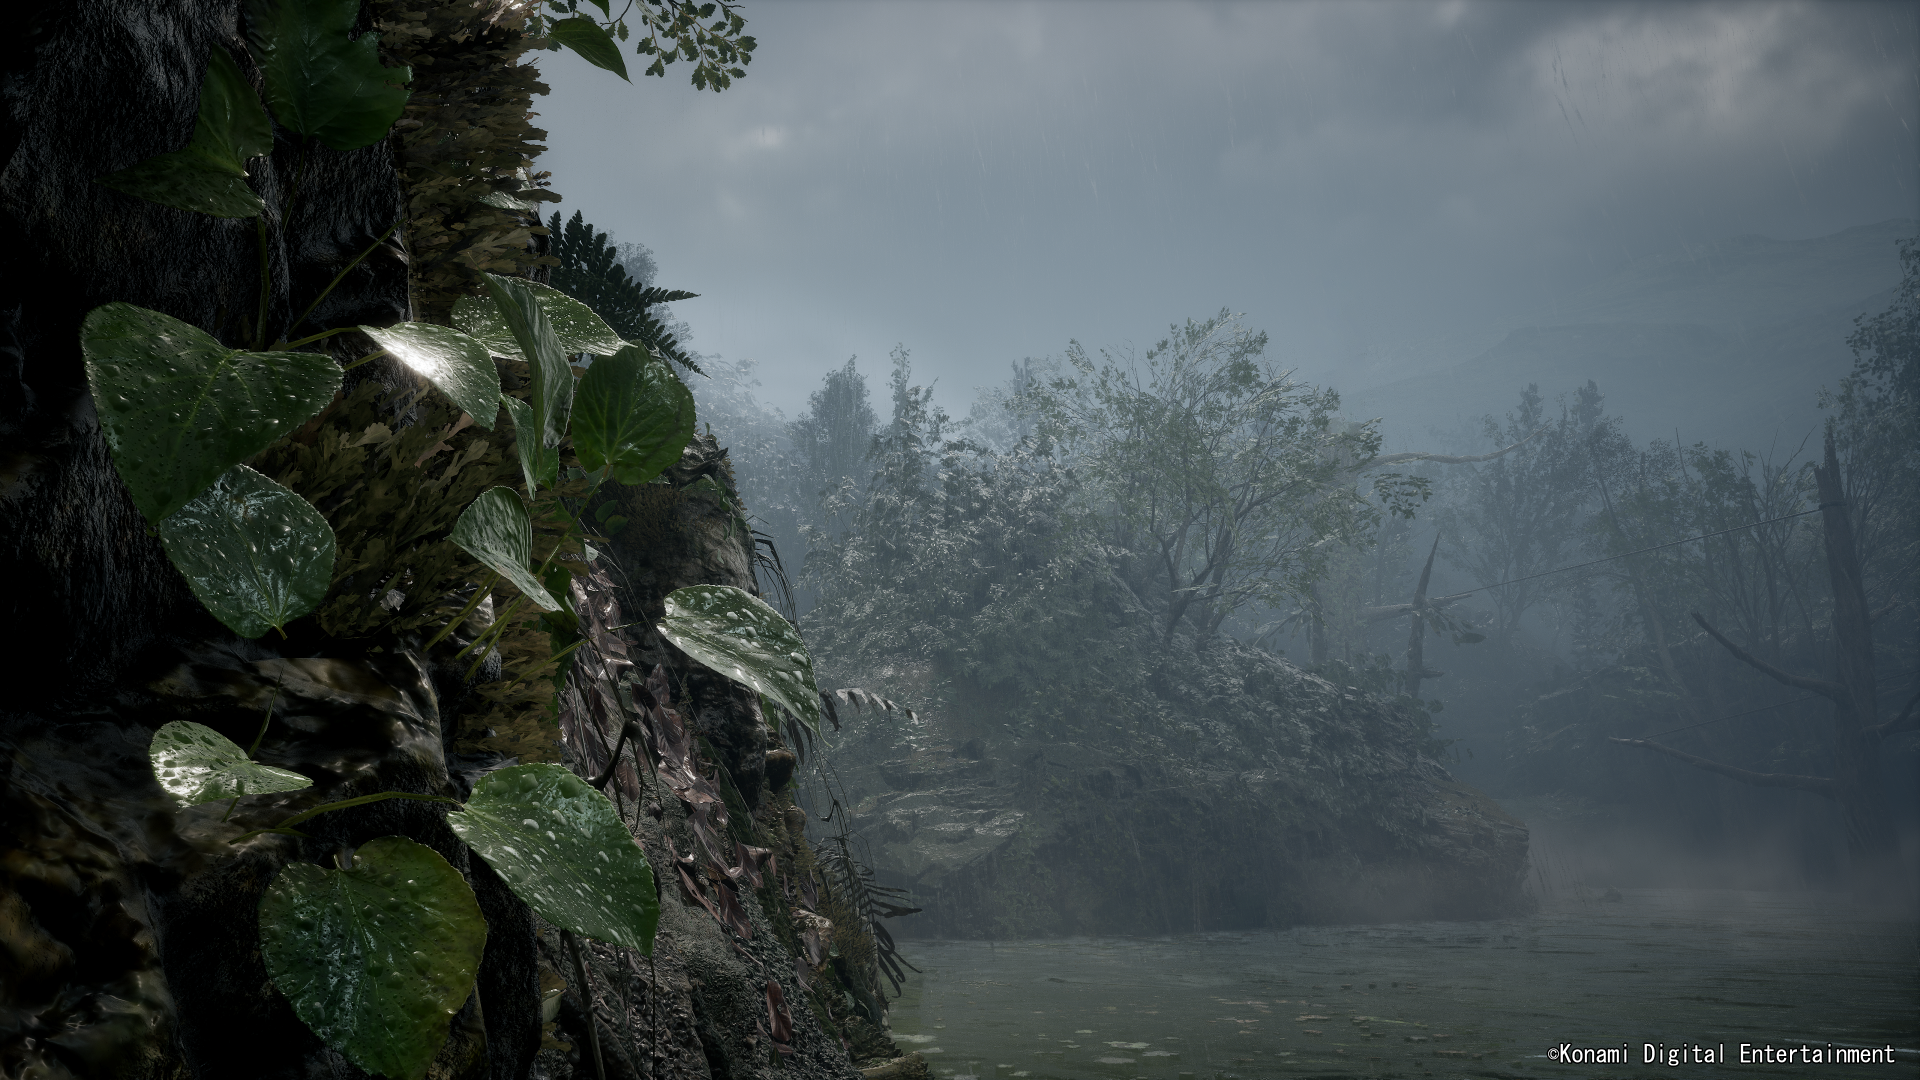 Rain over a jungle river in Metal Gear Solid Δ: Snake Eater (TBA), Konami